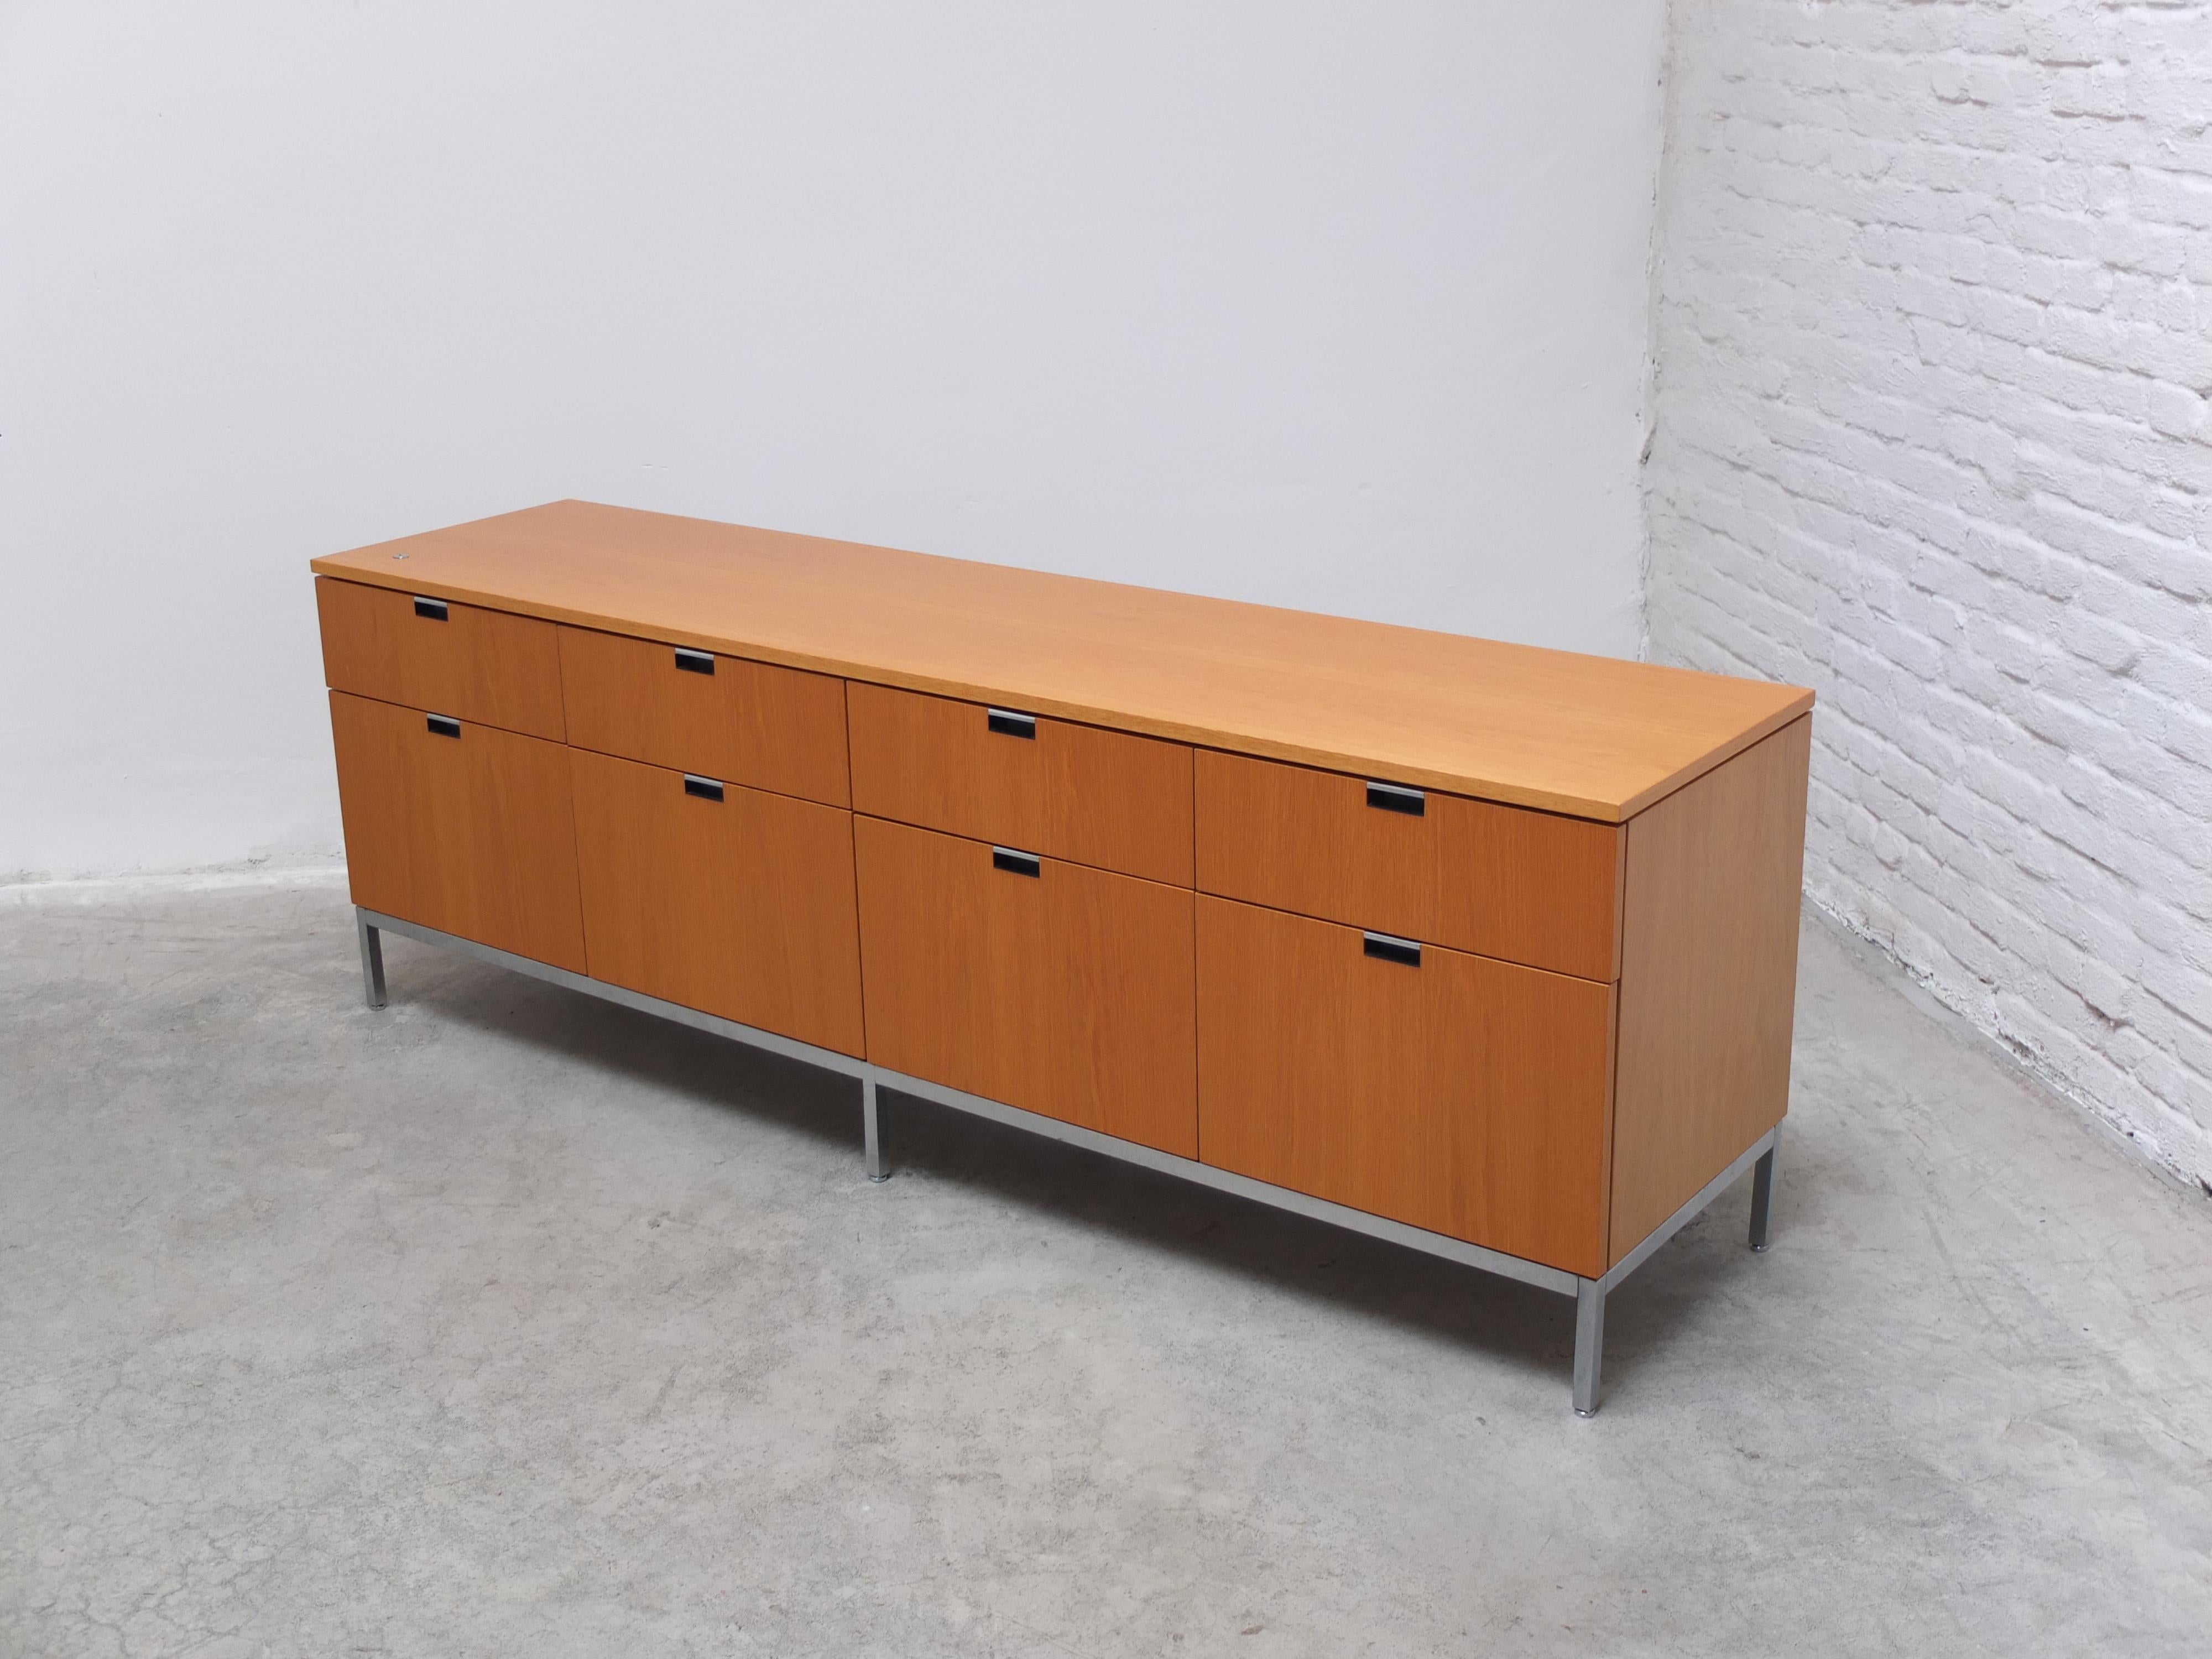 American Freestanding 8-Drawer Credenza by Florence Knoll for Knoll, 1961